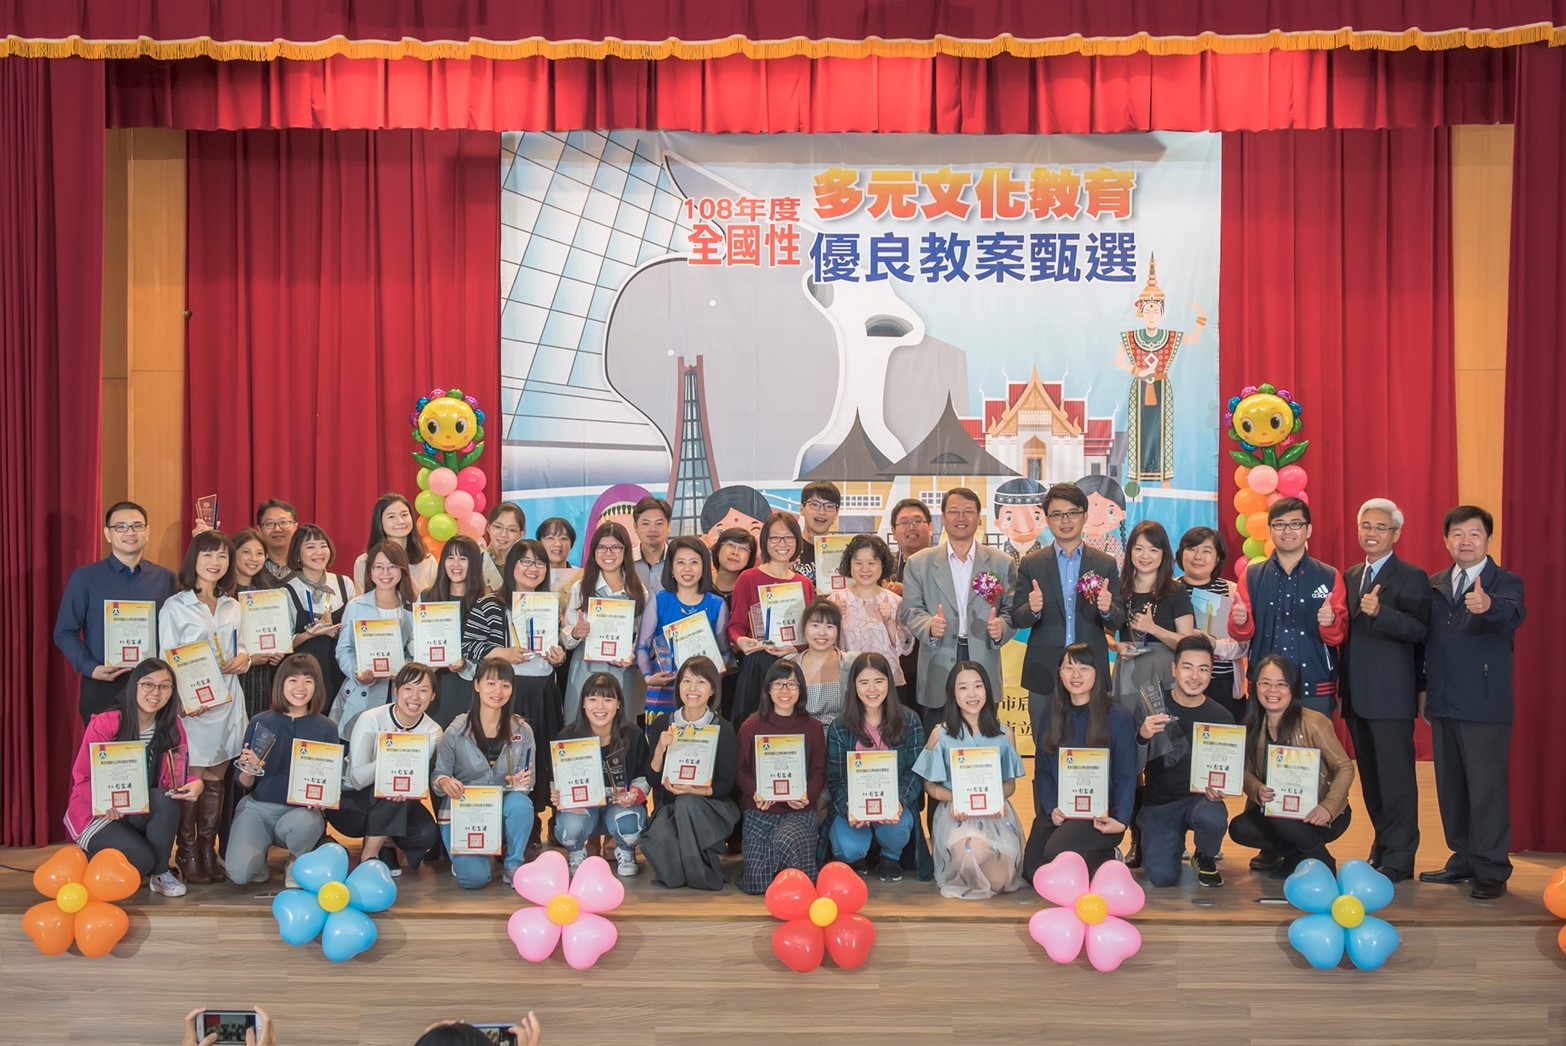 Embracing Diversity starting at Young Age: Taichung City Focus on the Education of The New Resident. Photograph: Taichung City Government